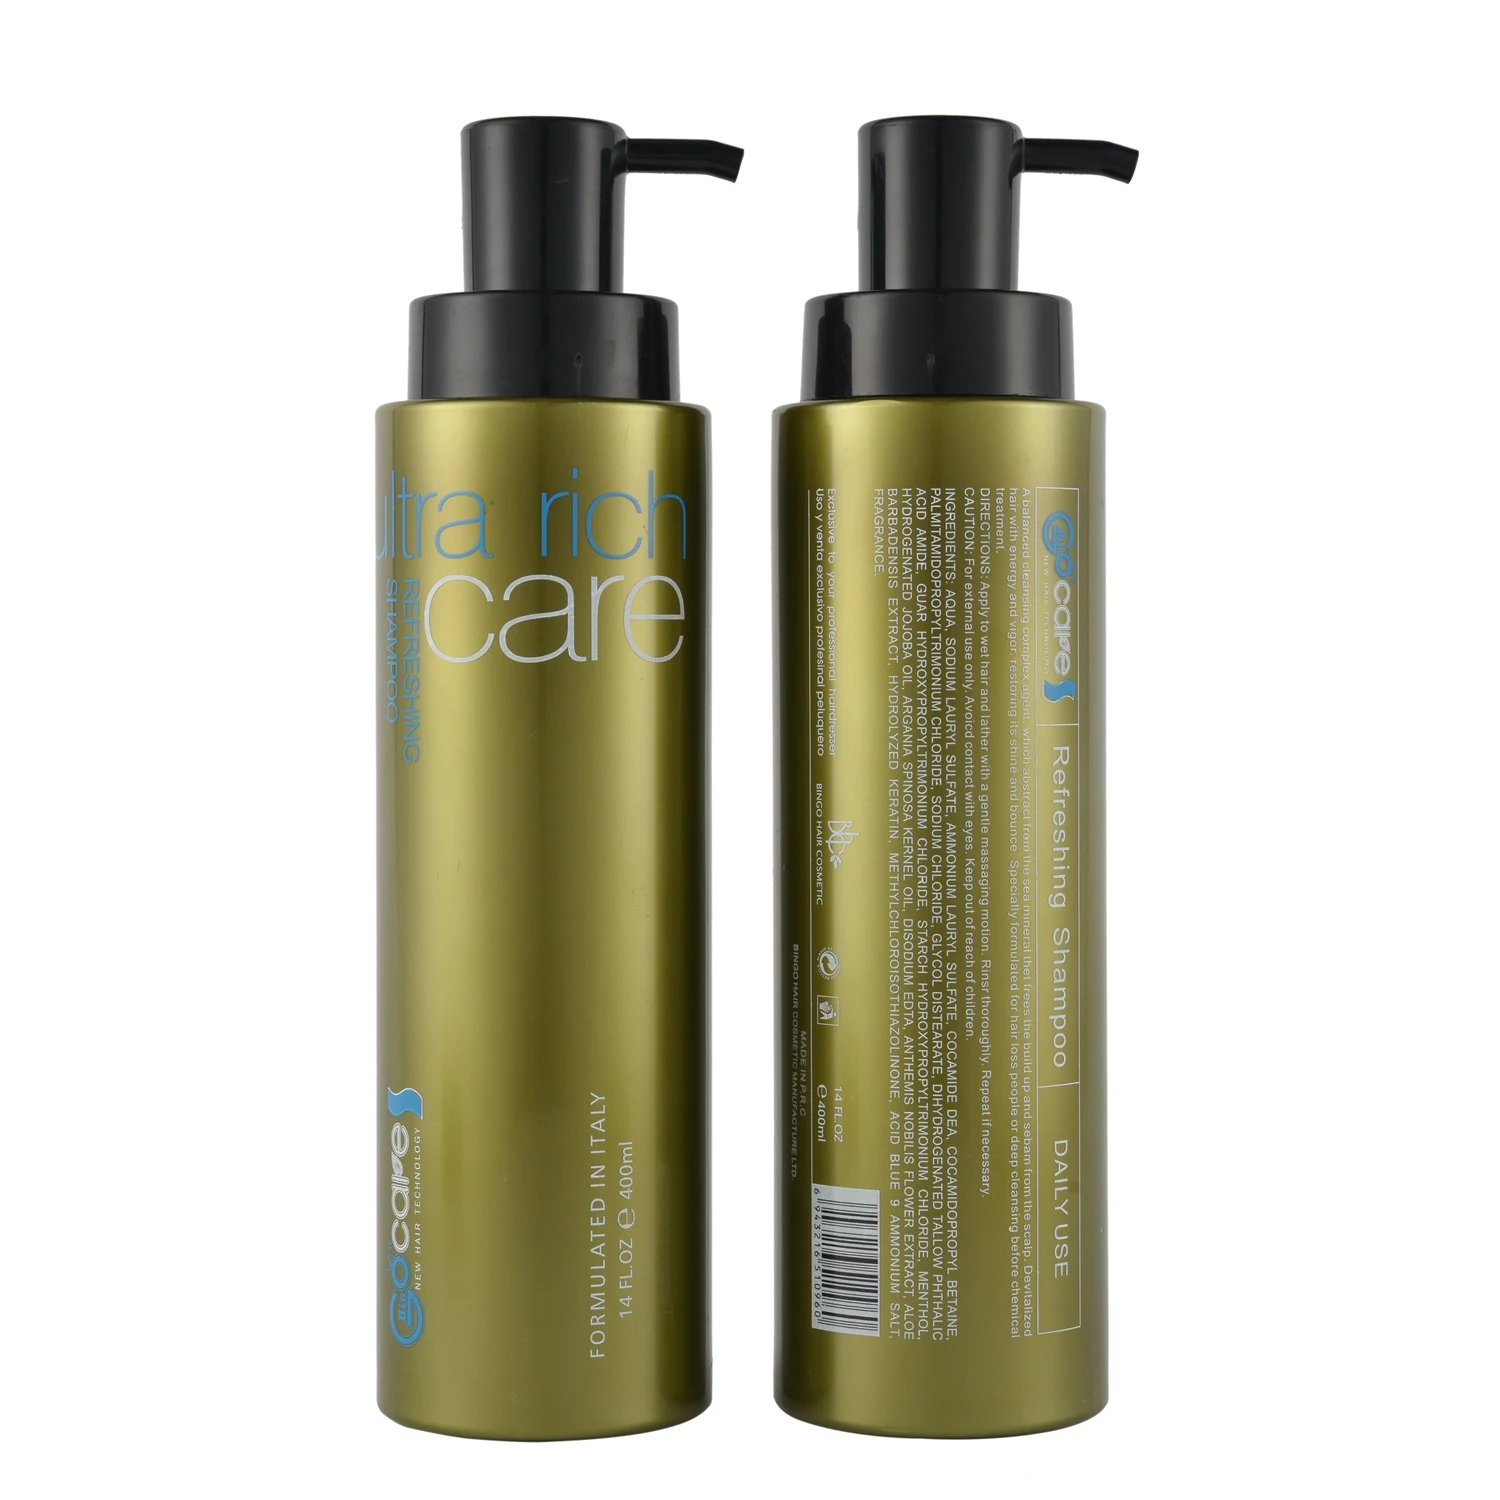 

OEM Hair Extensions Shampoo Clarifying Wholesale Private Label Sulphate Free Vegan Natural Organic Sulfate Free Herbal Shampoo